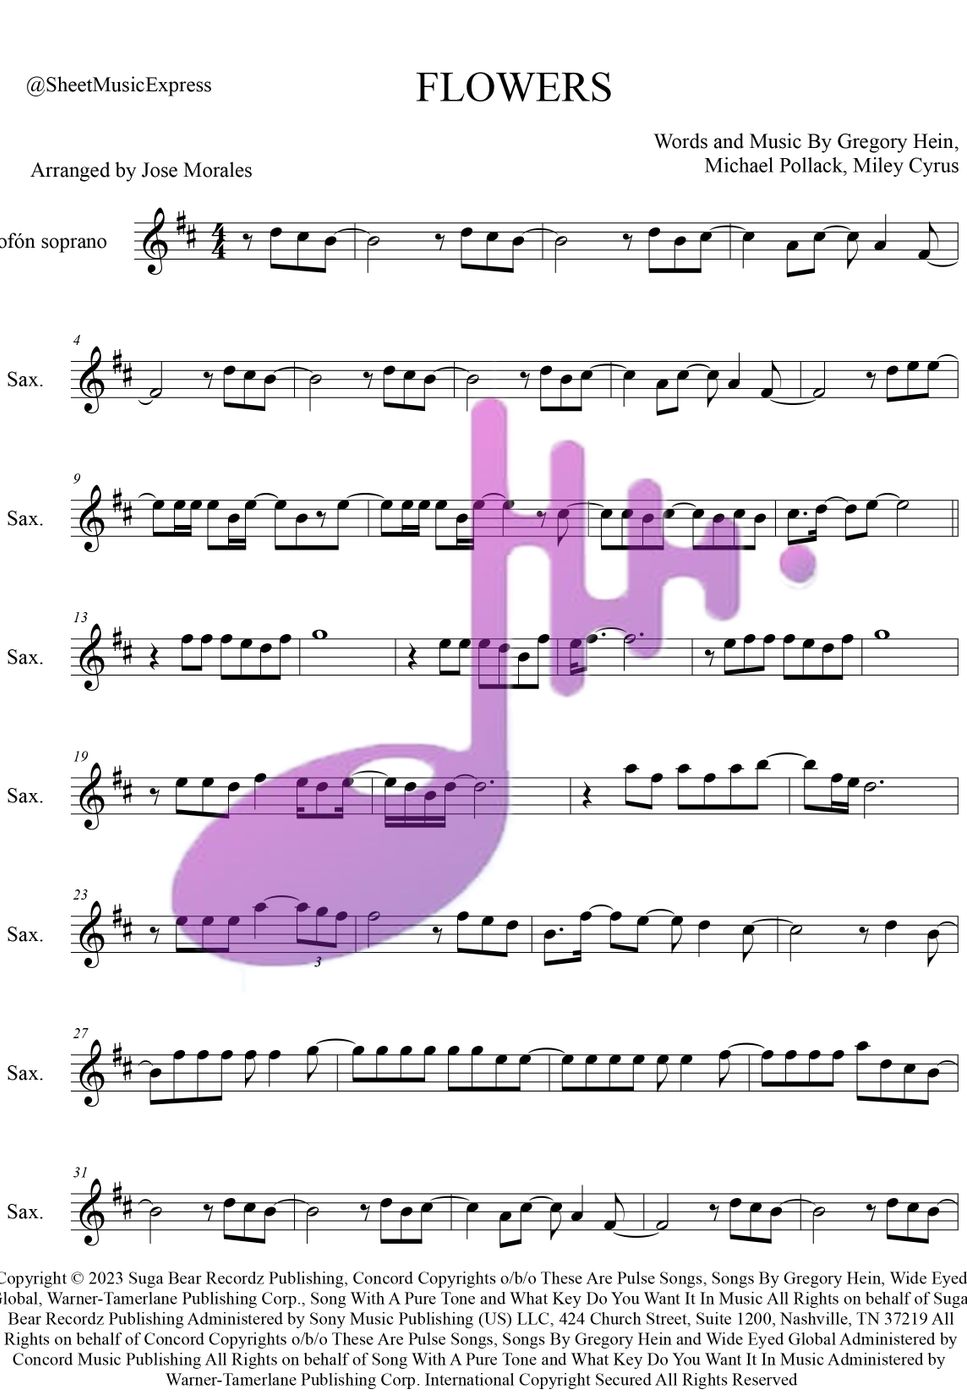 Miley Cyrus - Flowers - Miley Cyrus Soprano Sax (Pop) by Sheet Music Express